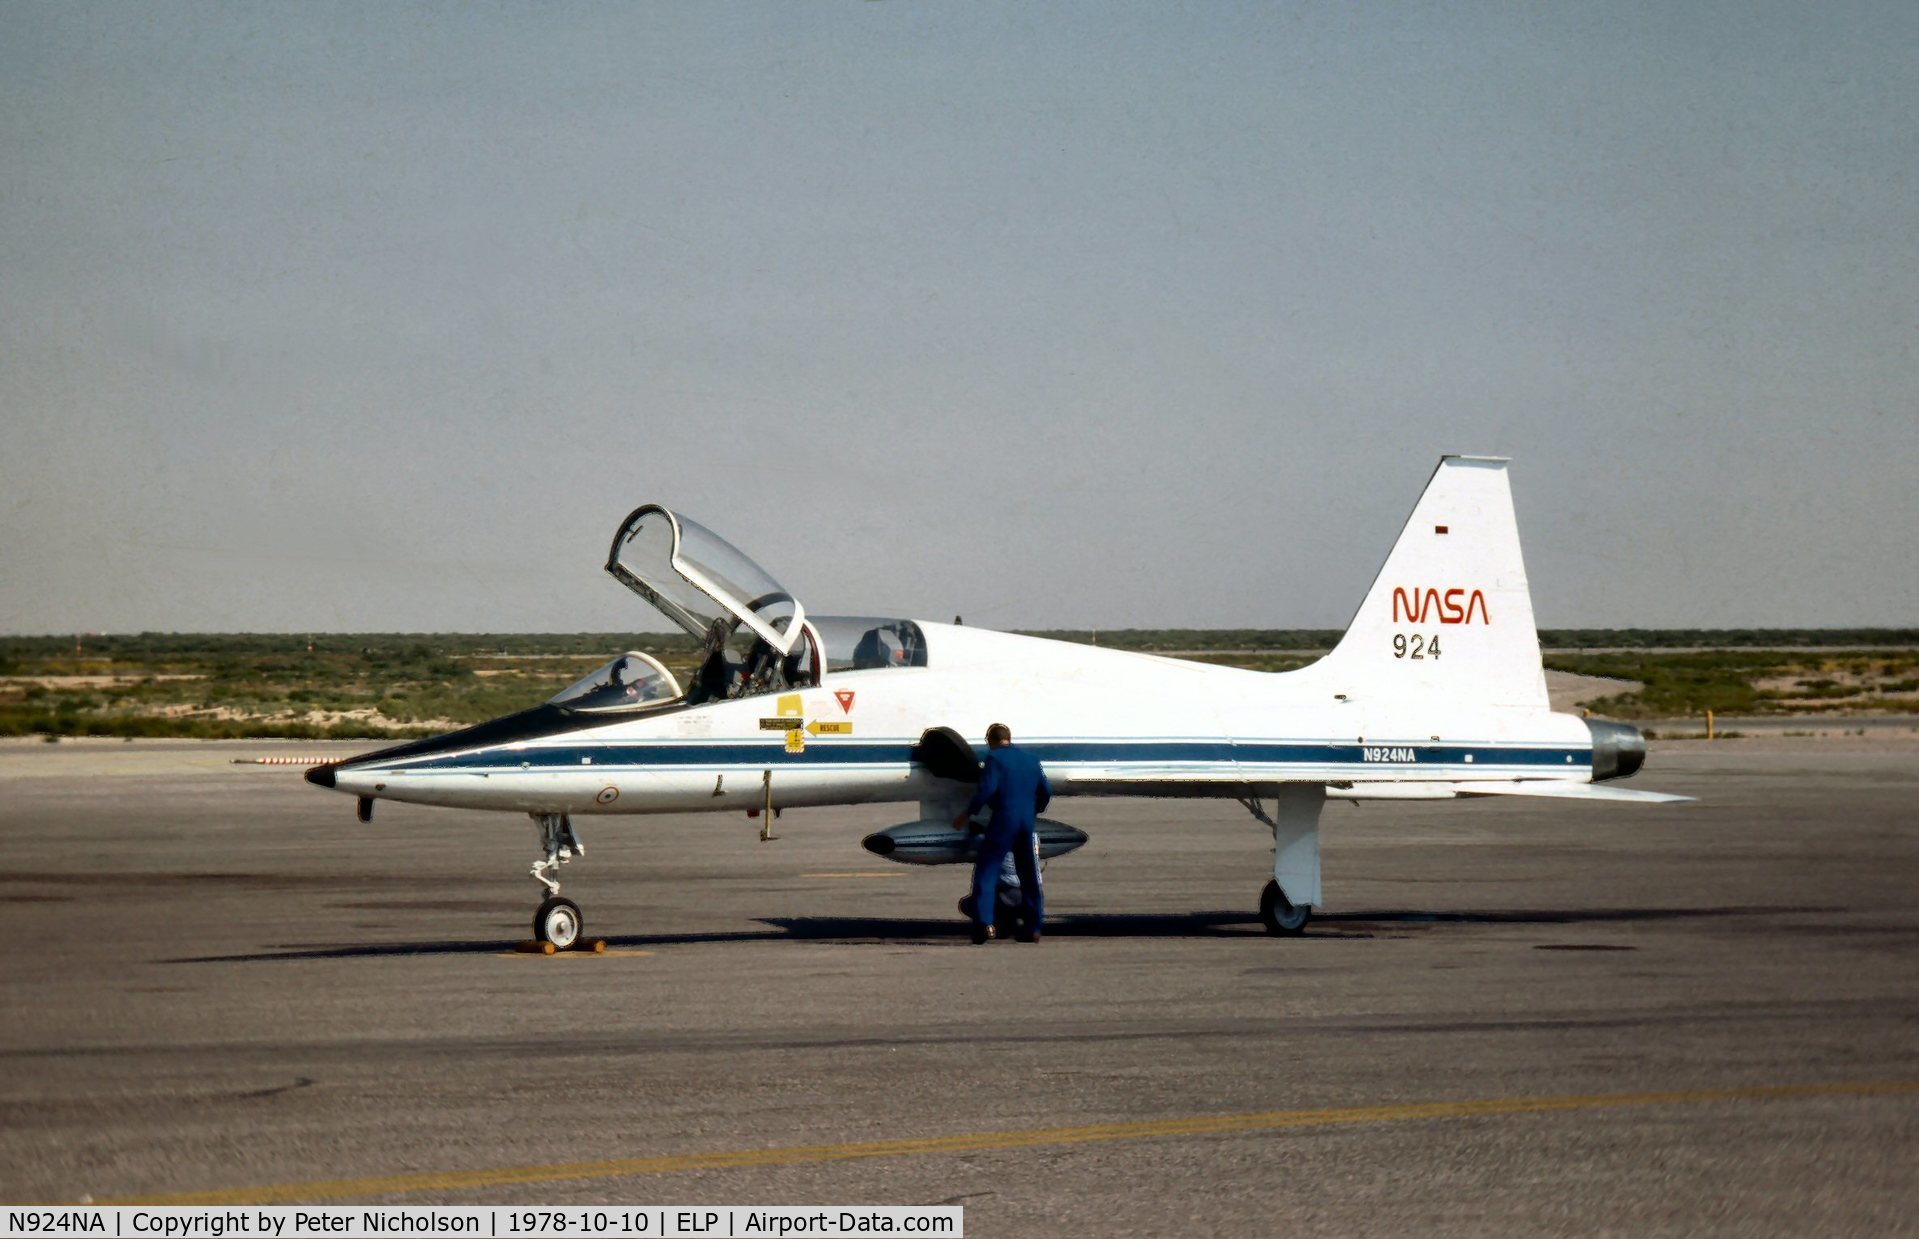 N924NA, 1969 Northrop T-38A C/N 67-14825, Another NASA T-38A Talon staging through El Paso in October 1978.